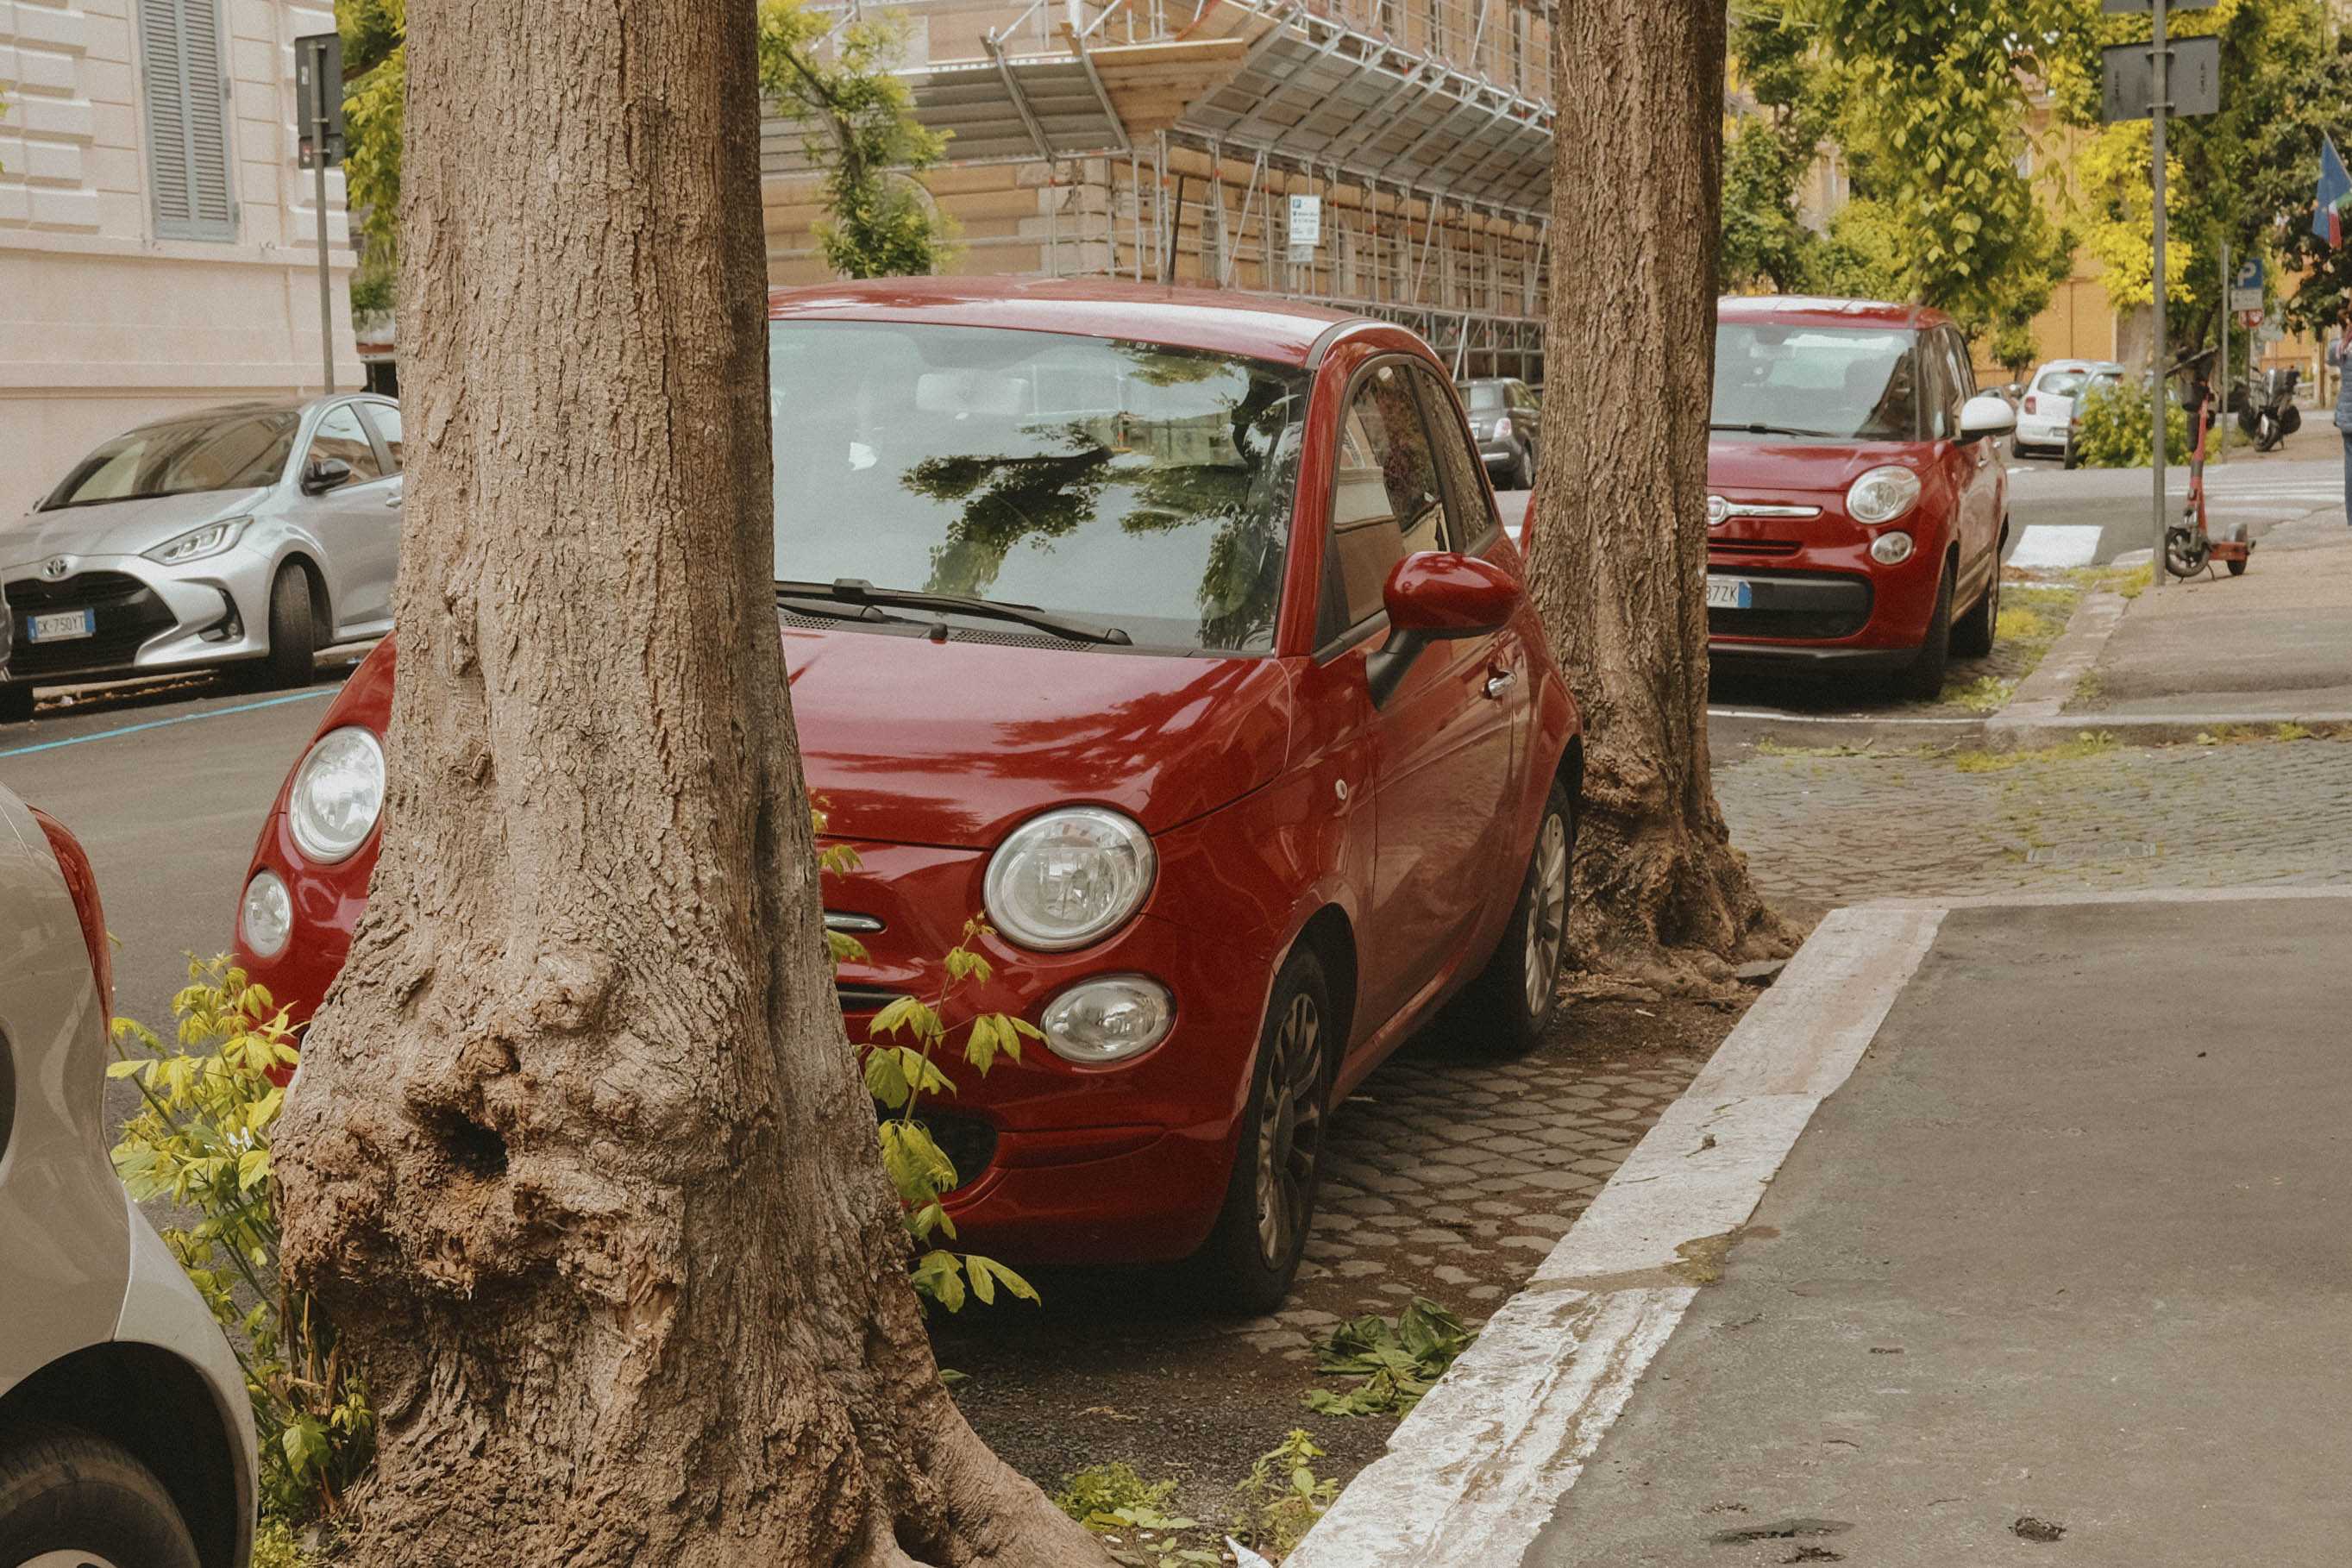 Fiat parked between two trees